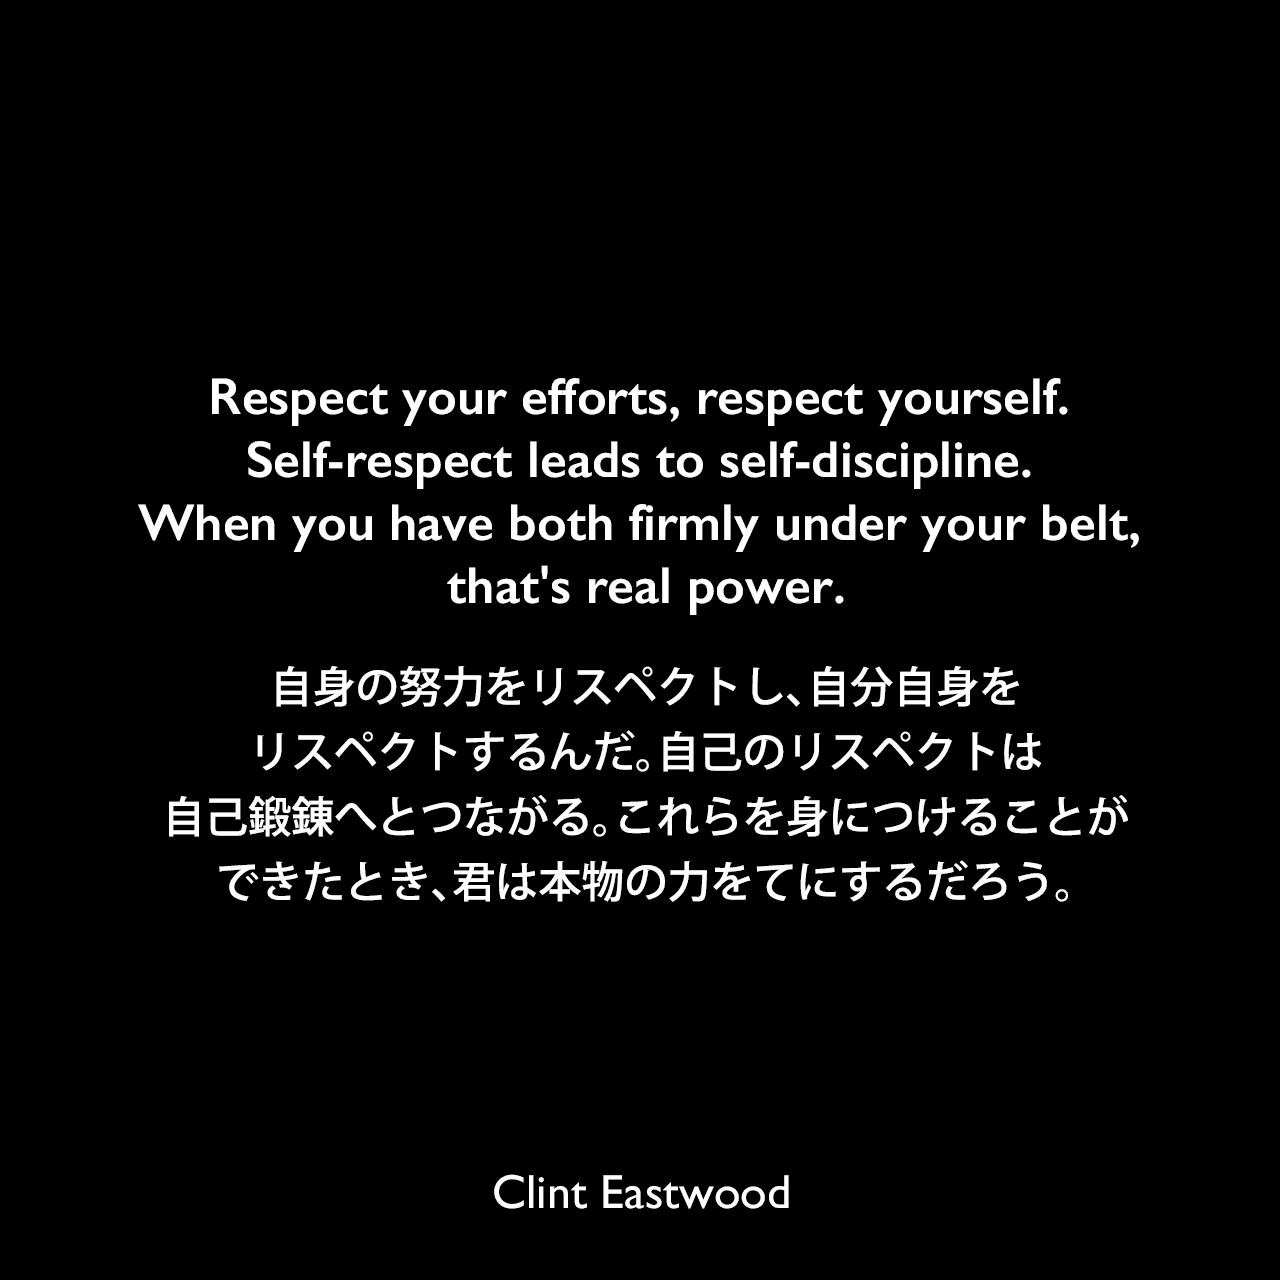 Respect your efforts, respect yourself. Self-respect leads to self-discipline. When you have both firmly under your belt, that's real power.自身の努力をリスペクトし、自分自身をリスペクトするんだ。自己のリスペクトは自己鍛錬へとつながる。これらを身につけることができたとき、君は本物の力をてにするだろう。Clint Eastwood